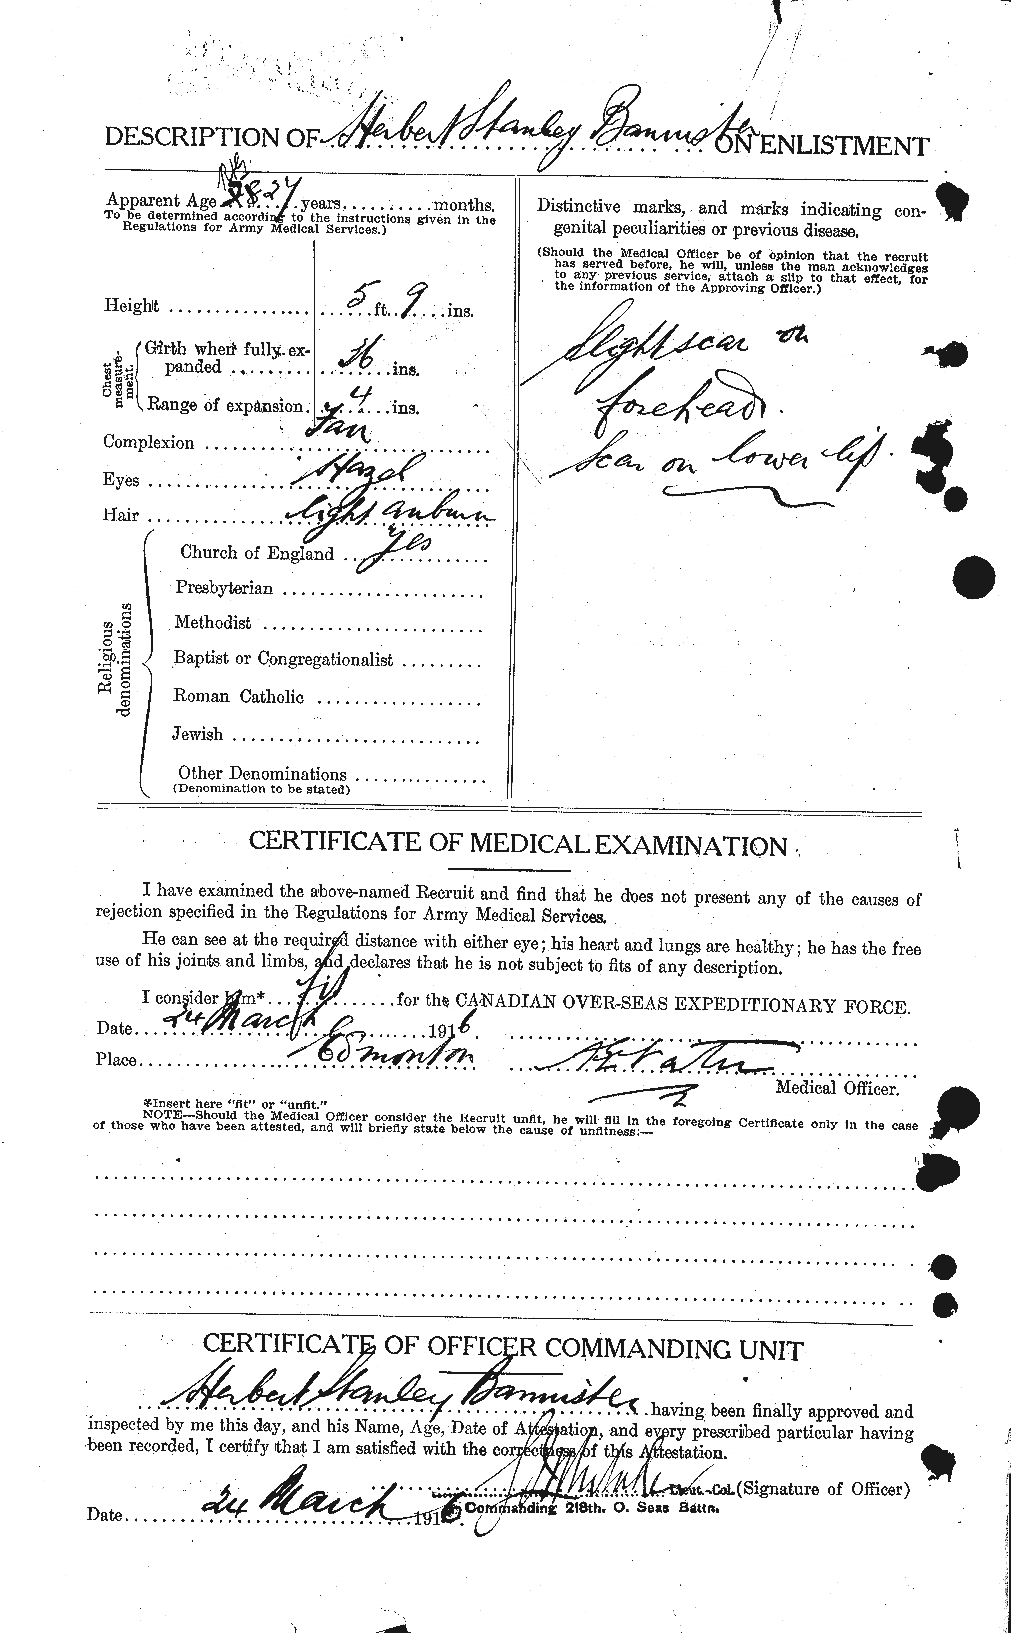 Personnel Records of the First World War - CEF 224784b